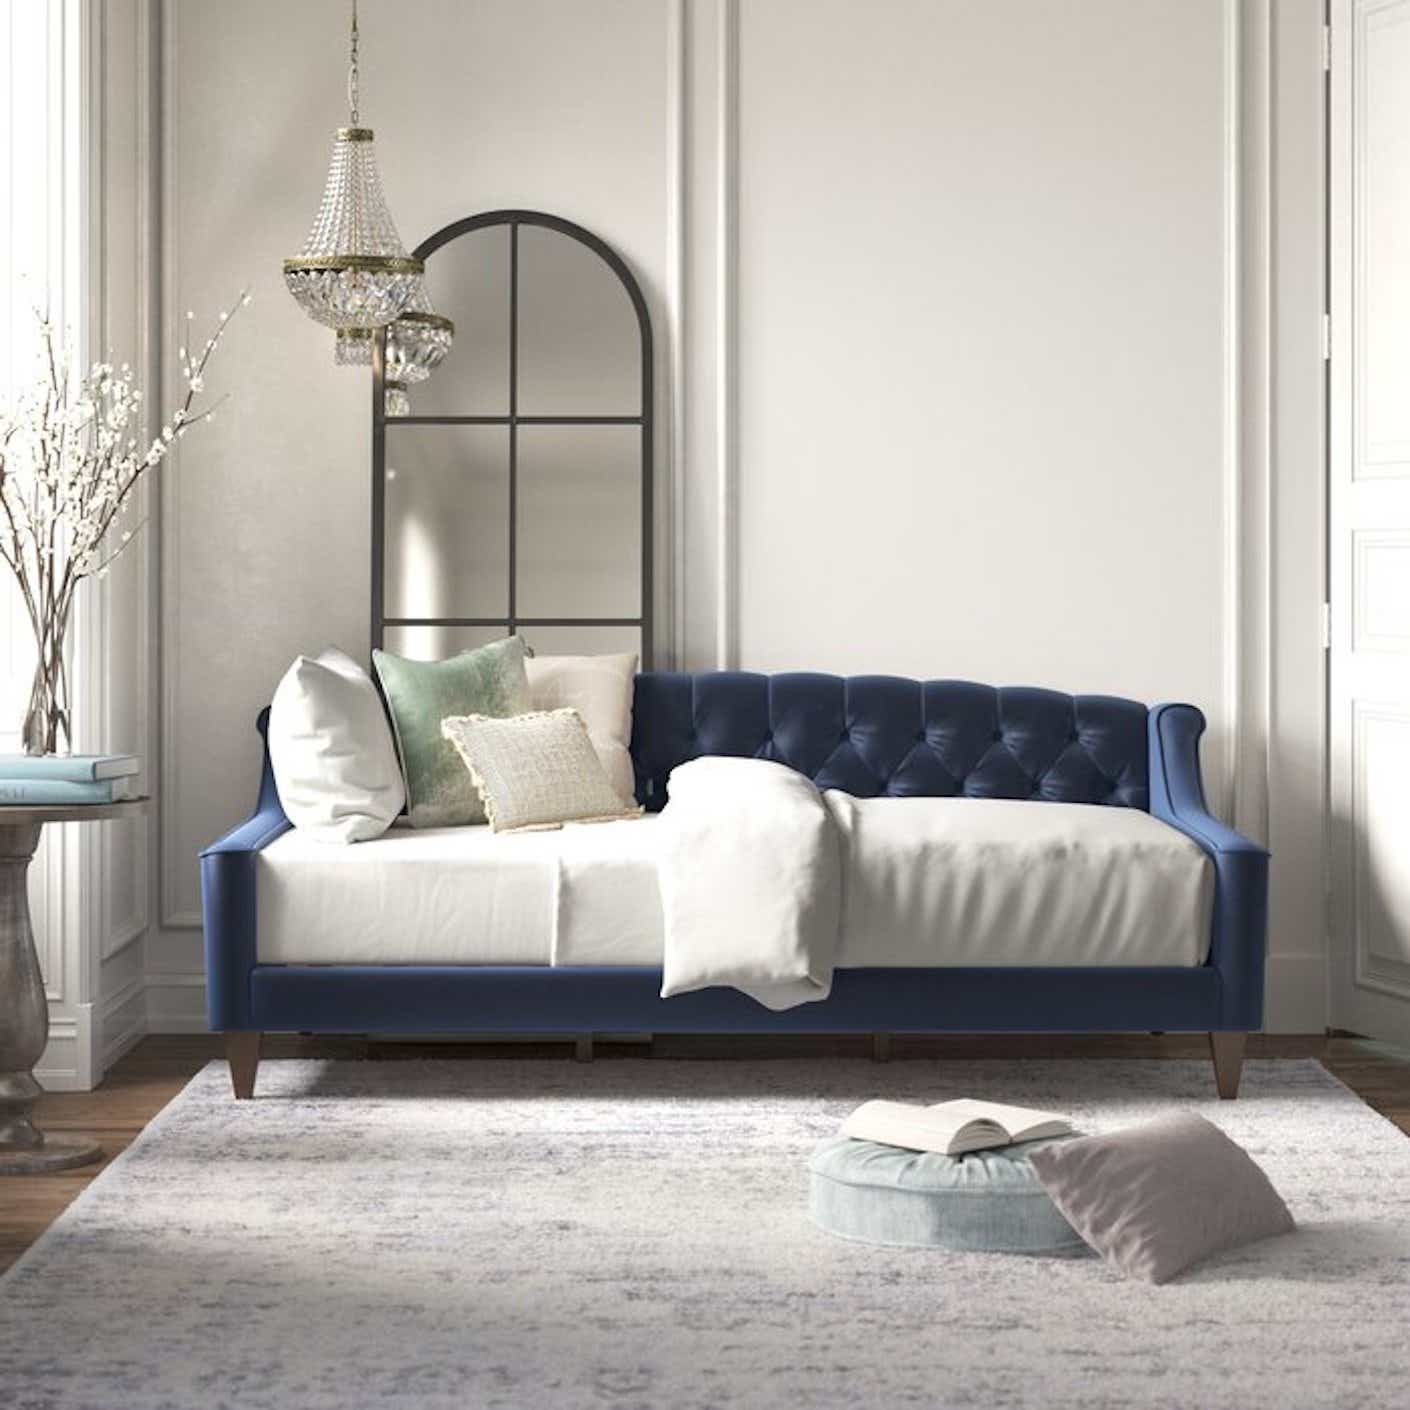 A dark blue, velvet daybed with tufted details in a sunny living space.